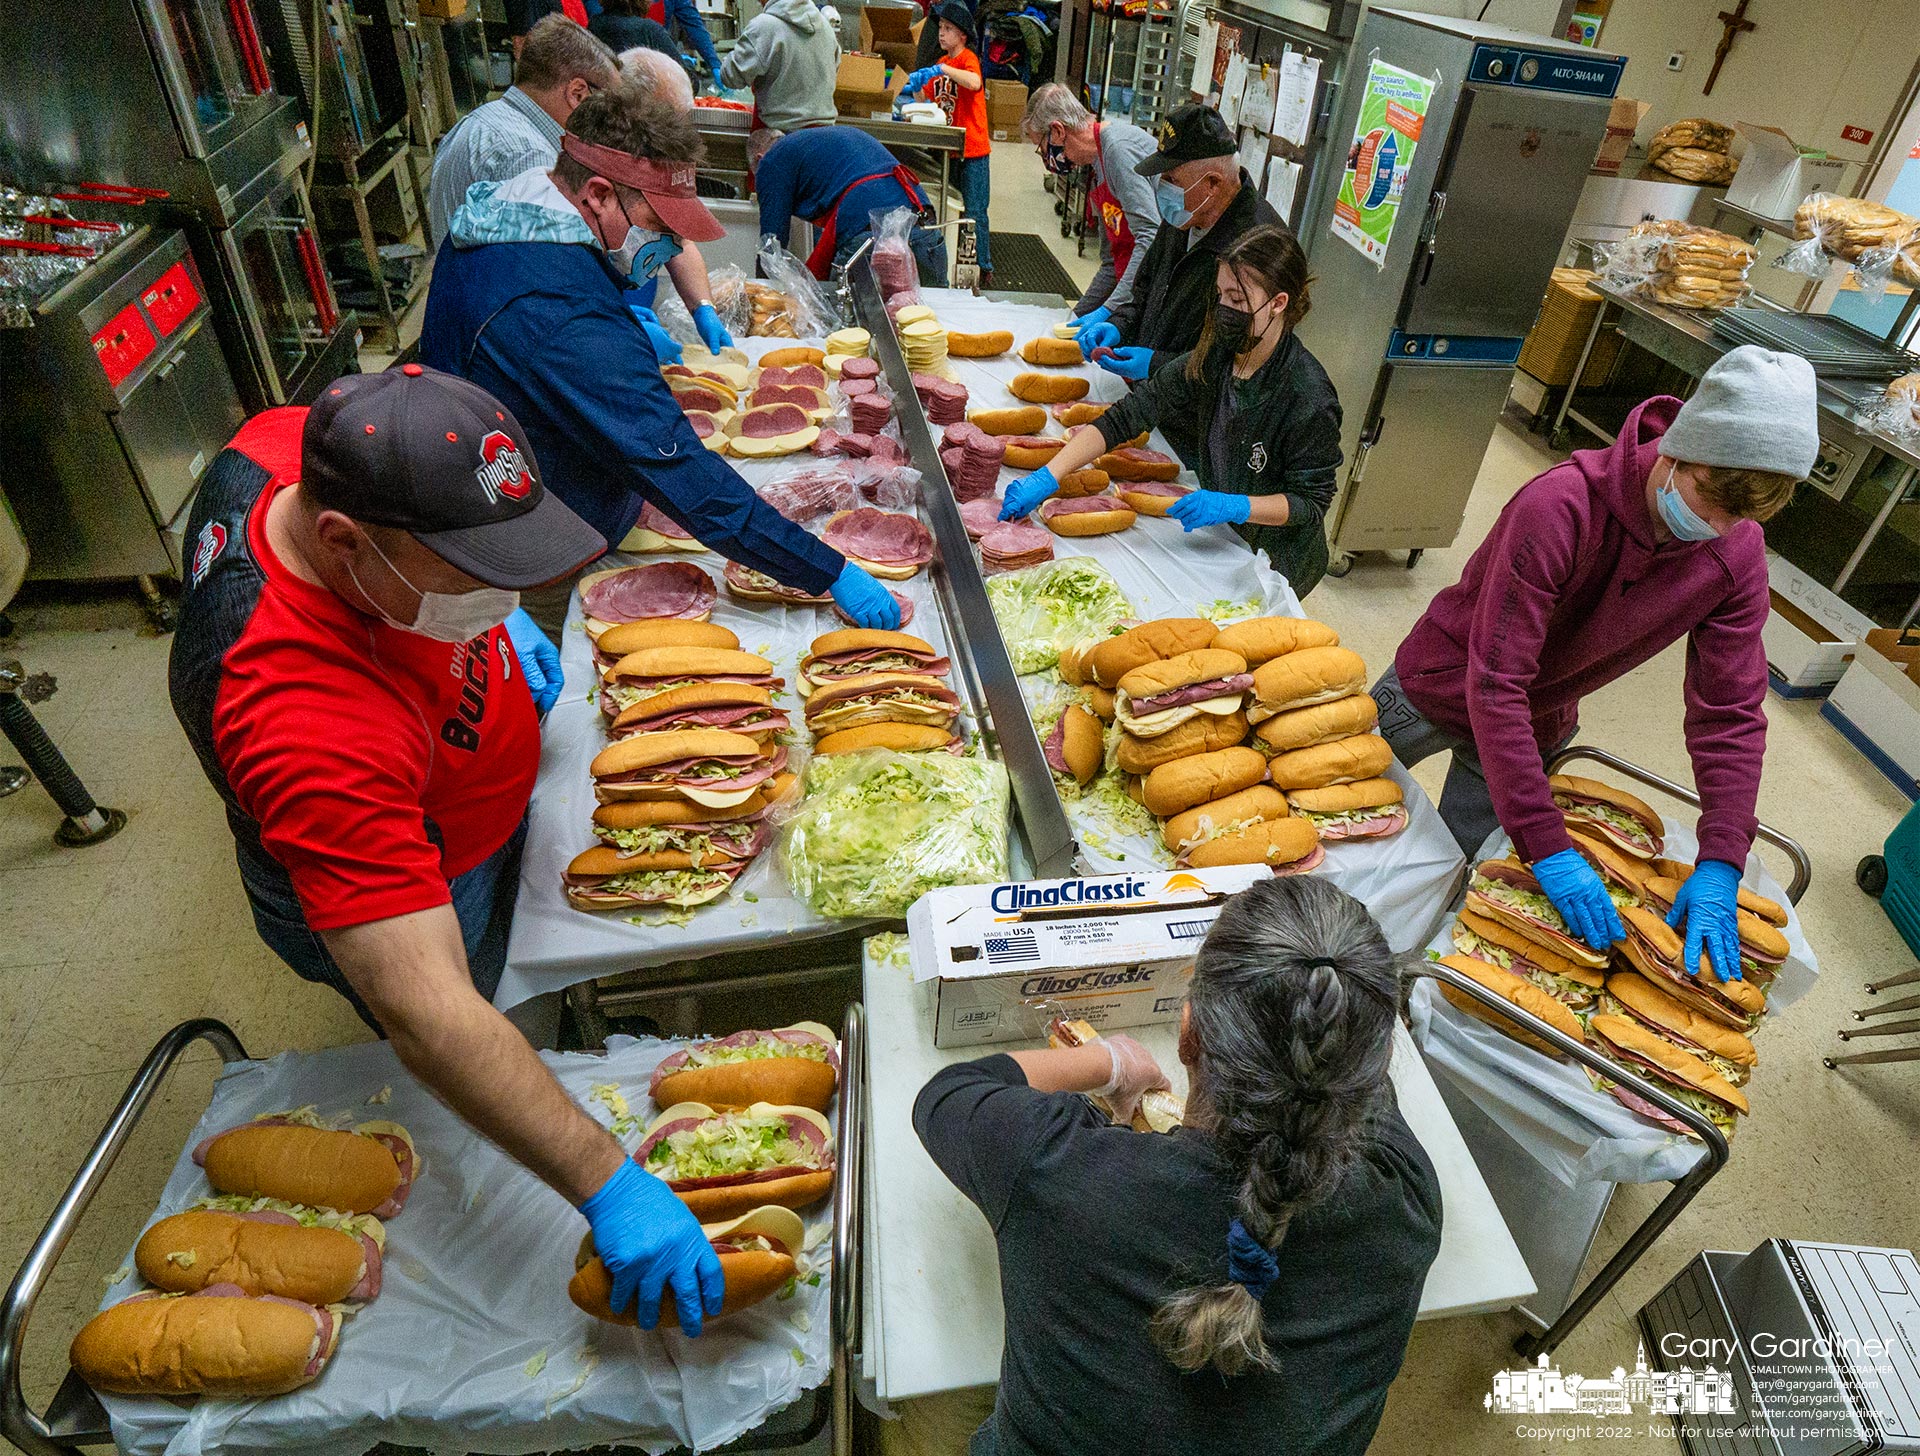 Members of the Knights of Columbus and volunteers make 50 dozen sub sandwiches to sell as a fundraiser after Masses at St. Paul the Apostle Church this weekend. My Final Photo for Feb. 12, 2022.